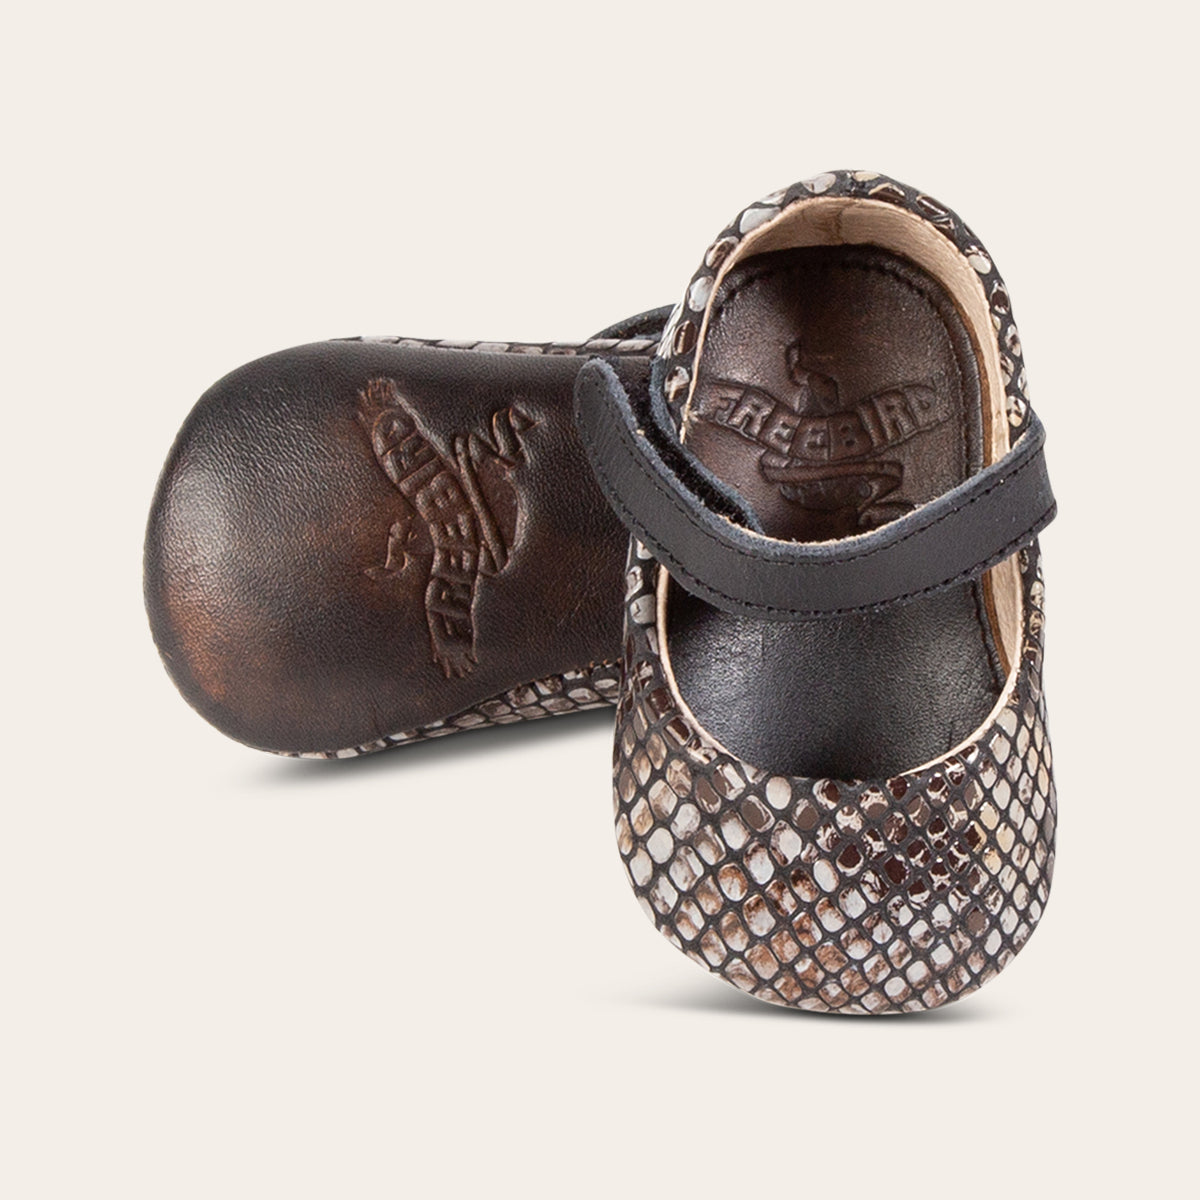 Side view showing leather strap detailing and soft leather imprinted sole on FREEBIRD infant baby Jane blue snake leather shoe